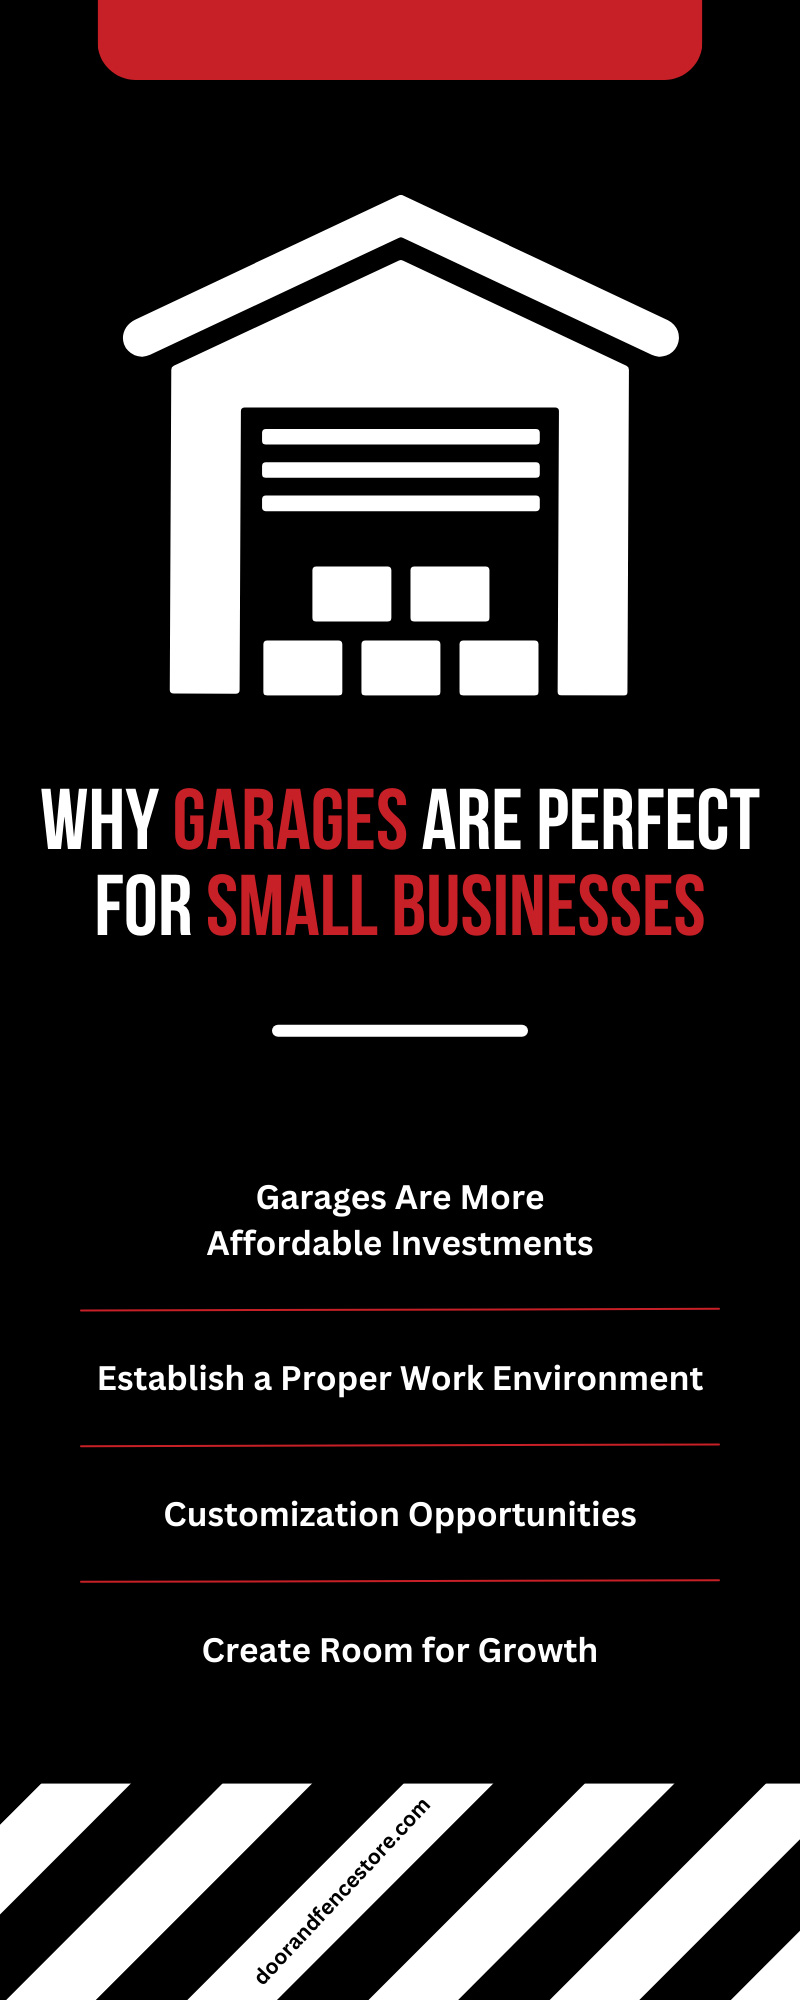 Why Garages Are Perfect for Small Businesses